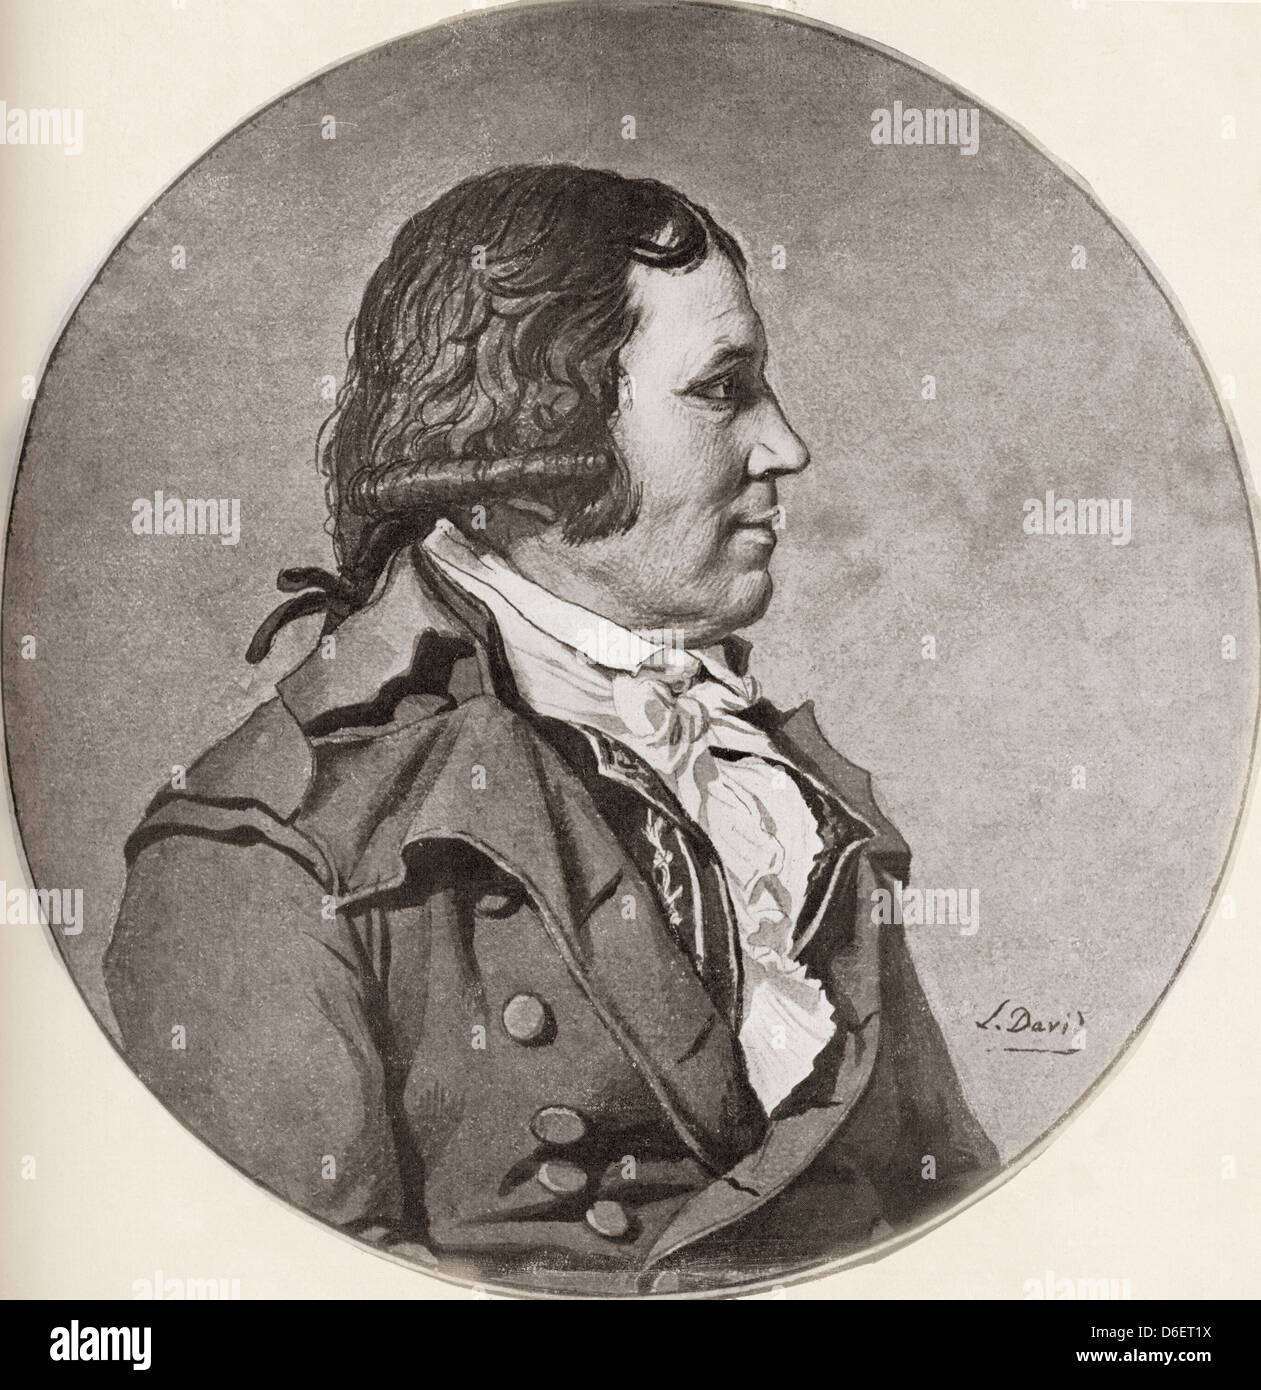 Edmond Louis Alexis Dubois-Crancé, 1747 –1814. French soldier and politician during the French Revolution. Stock Photo